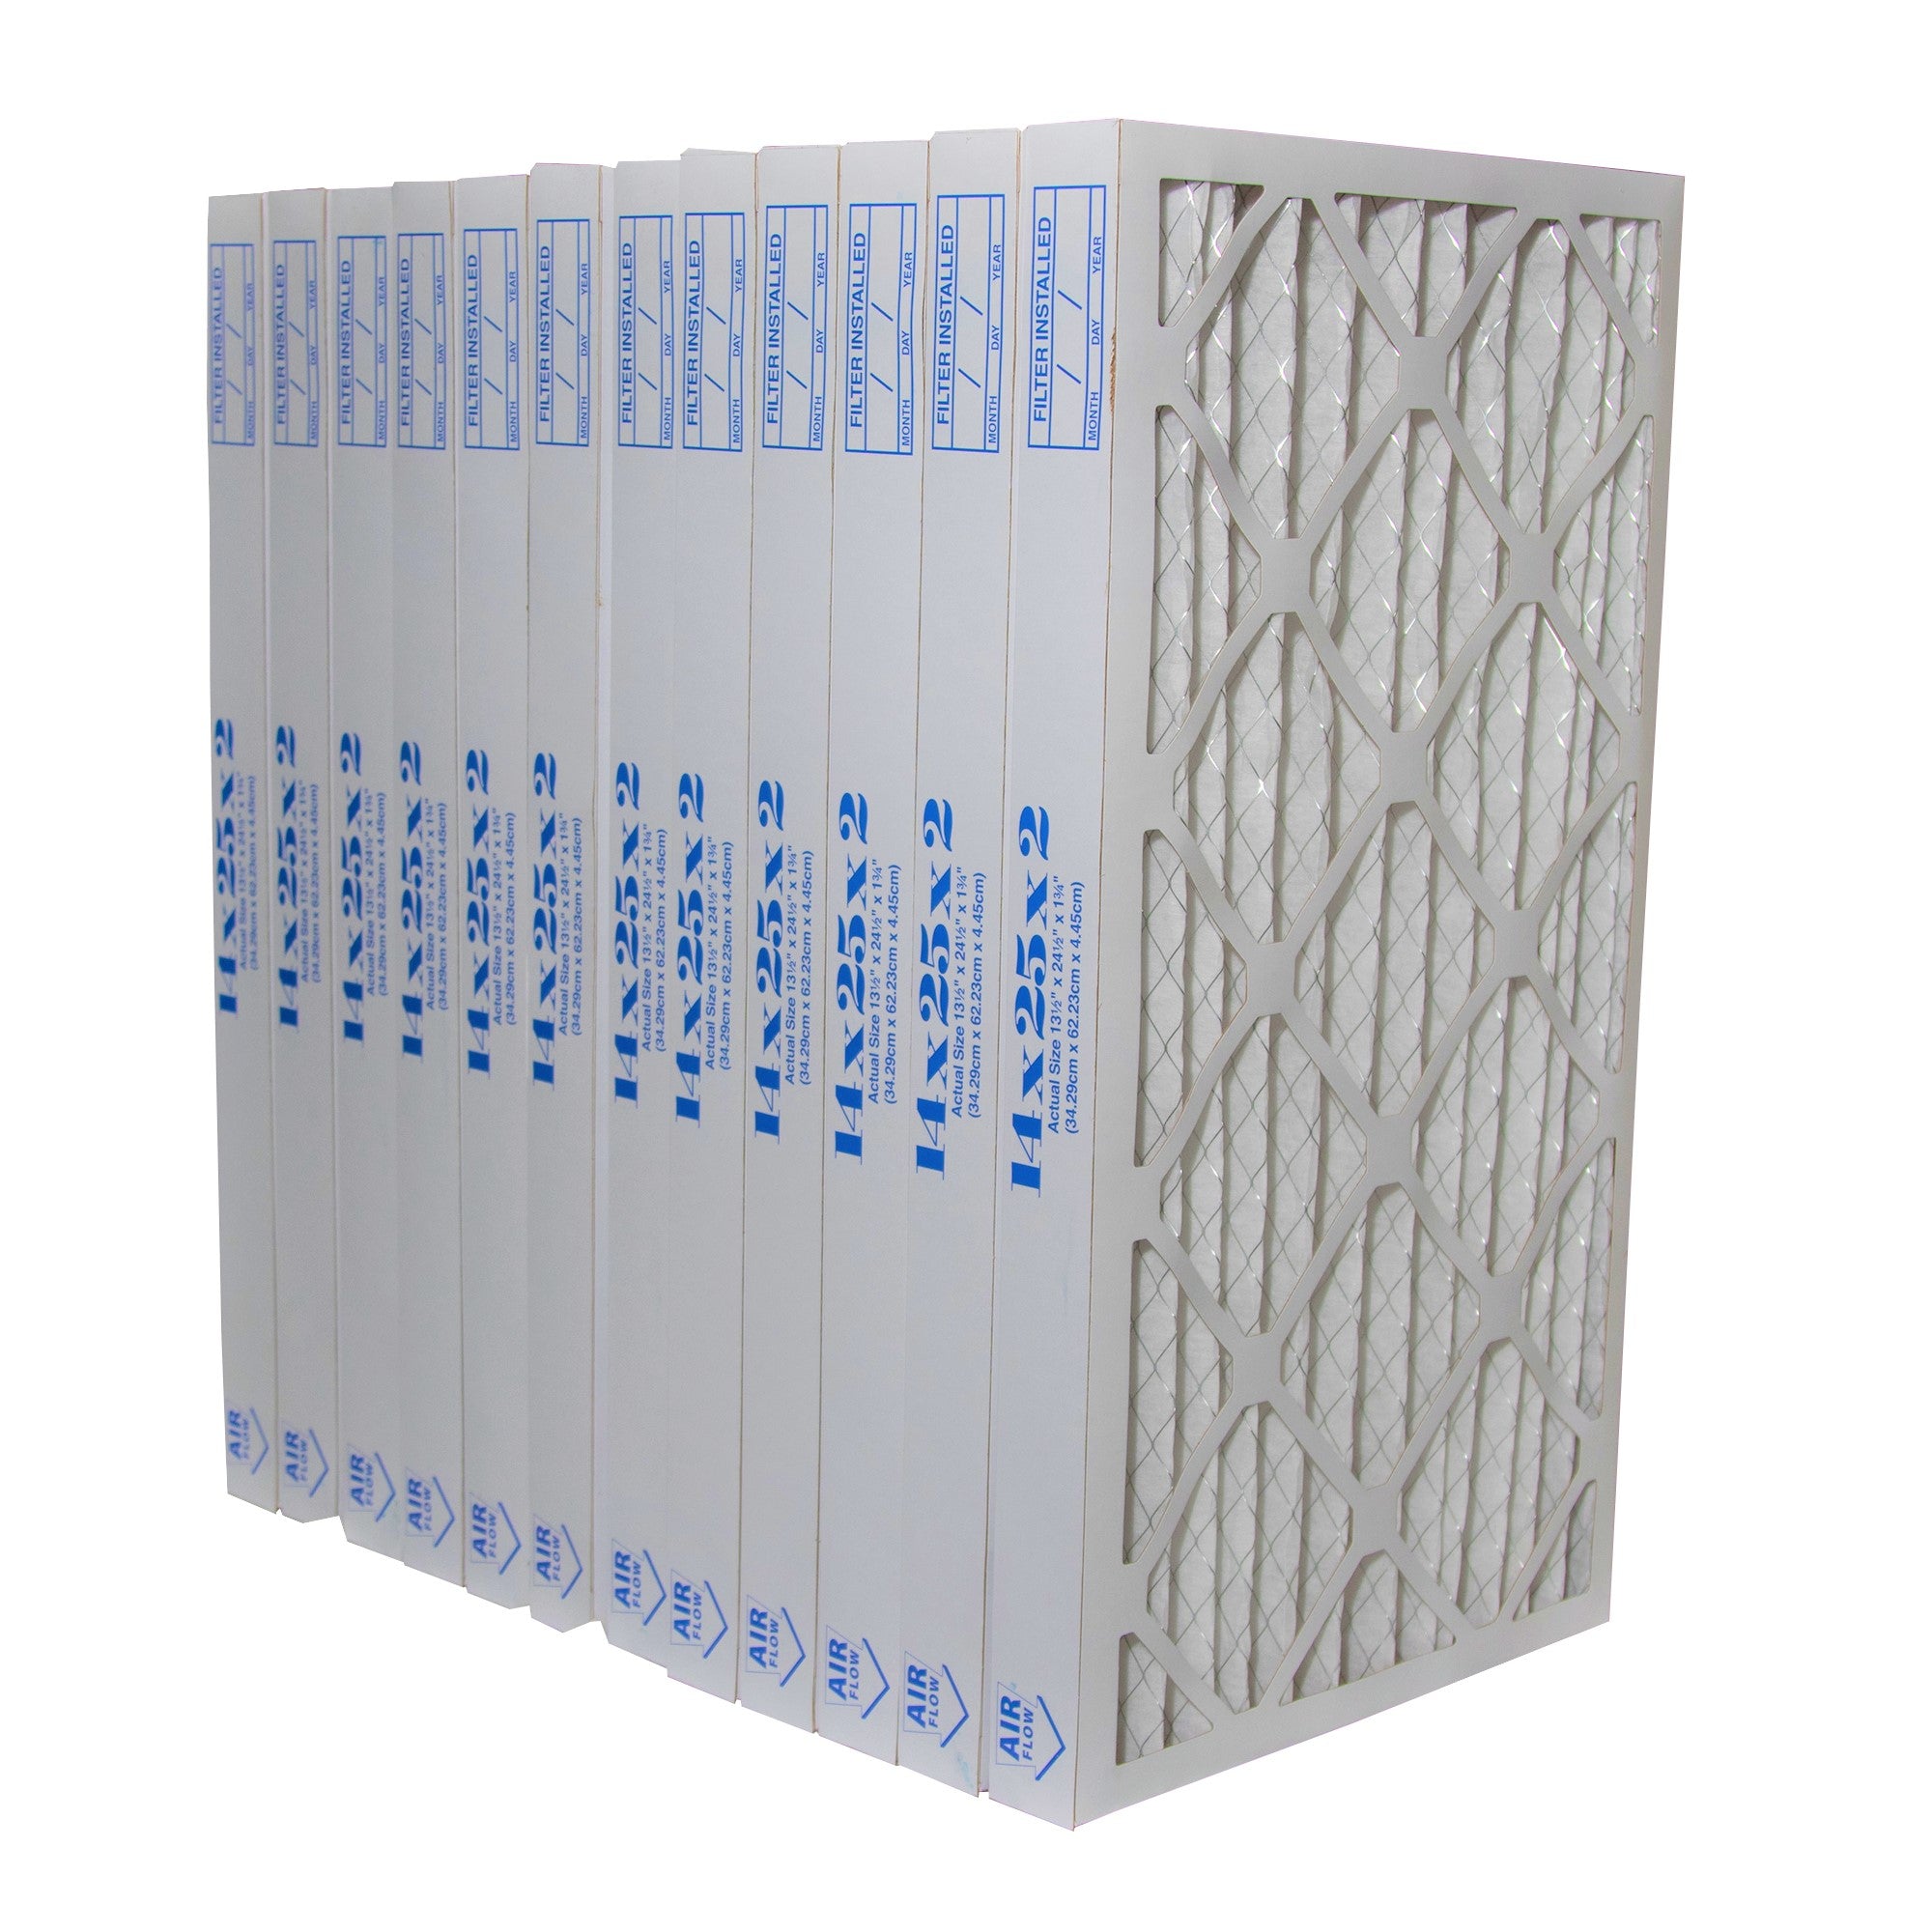 14x25x2 Furnace Filter MERV 8 Pleated Filters. Case of 12